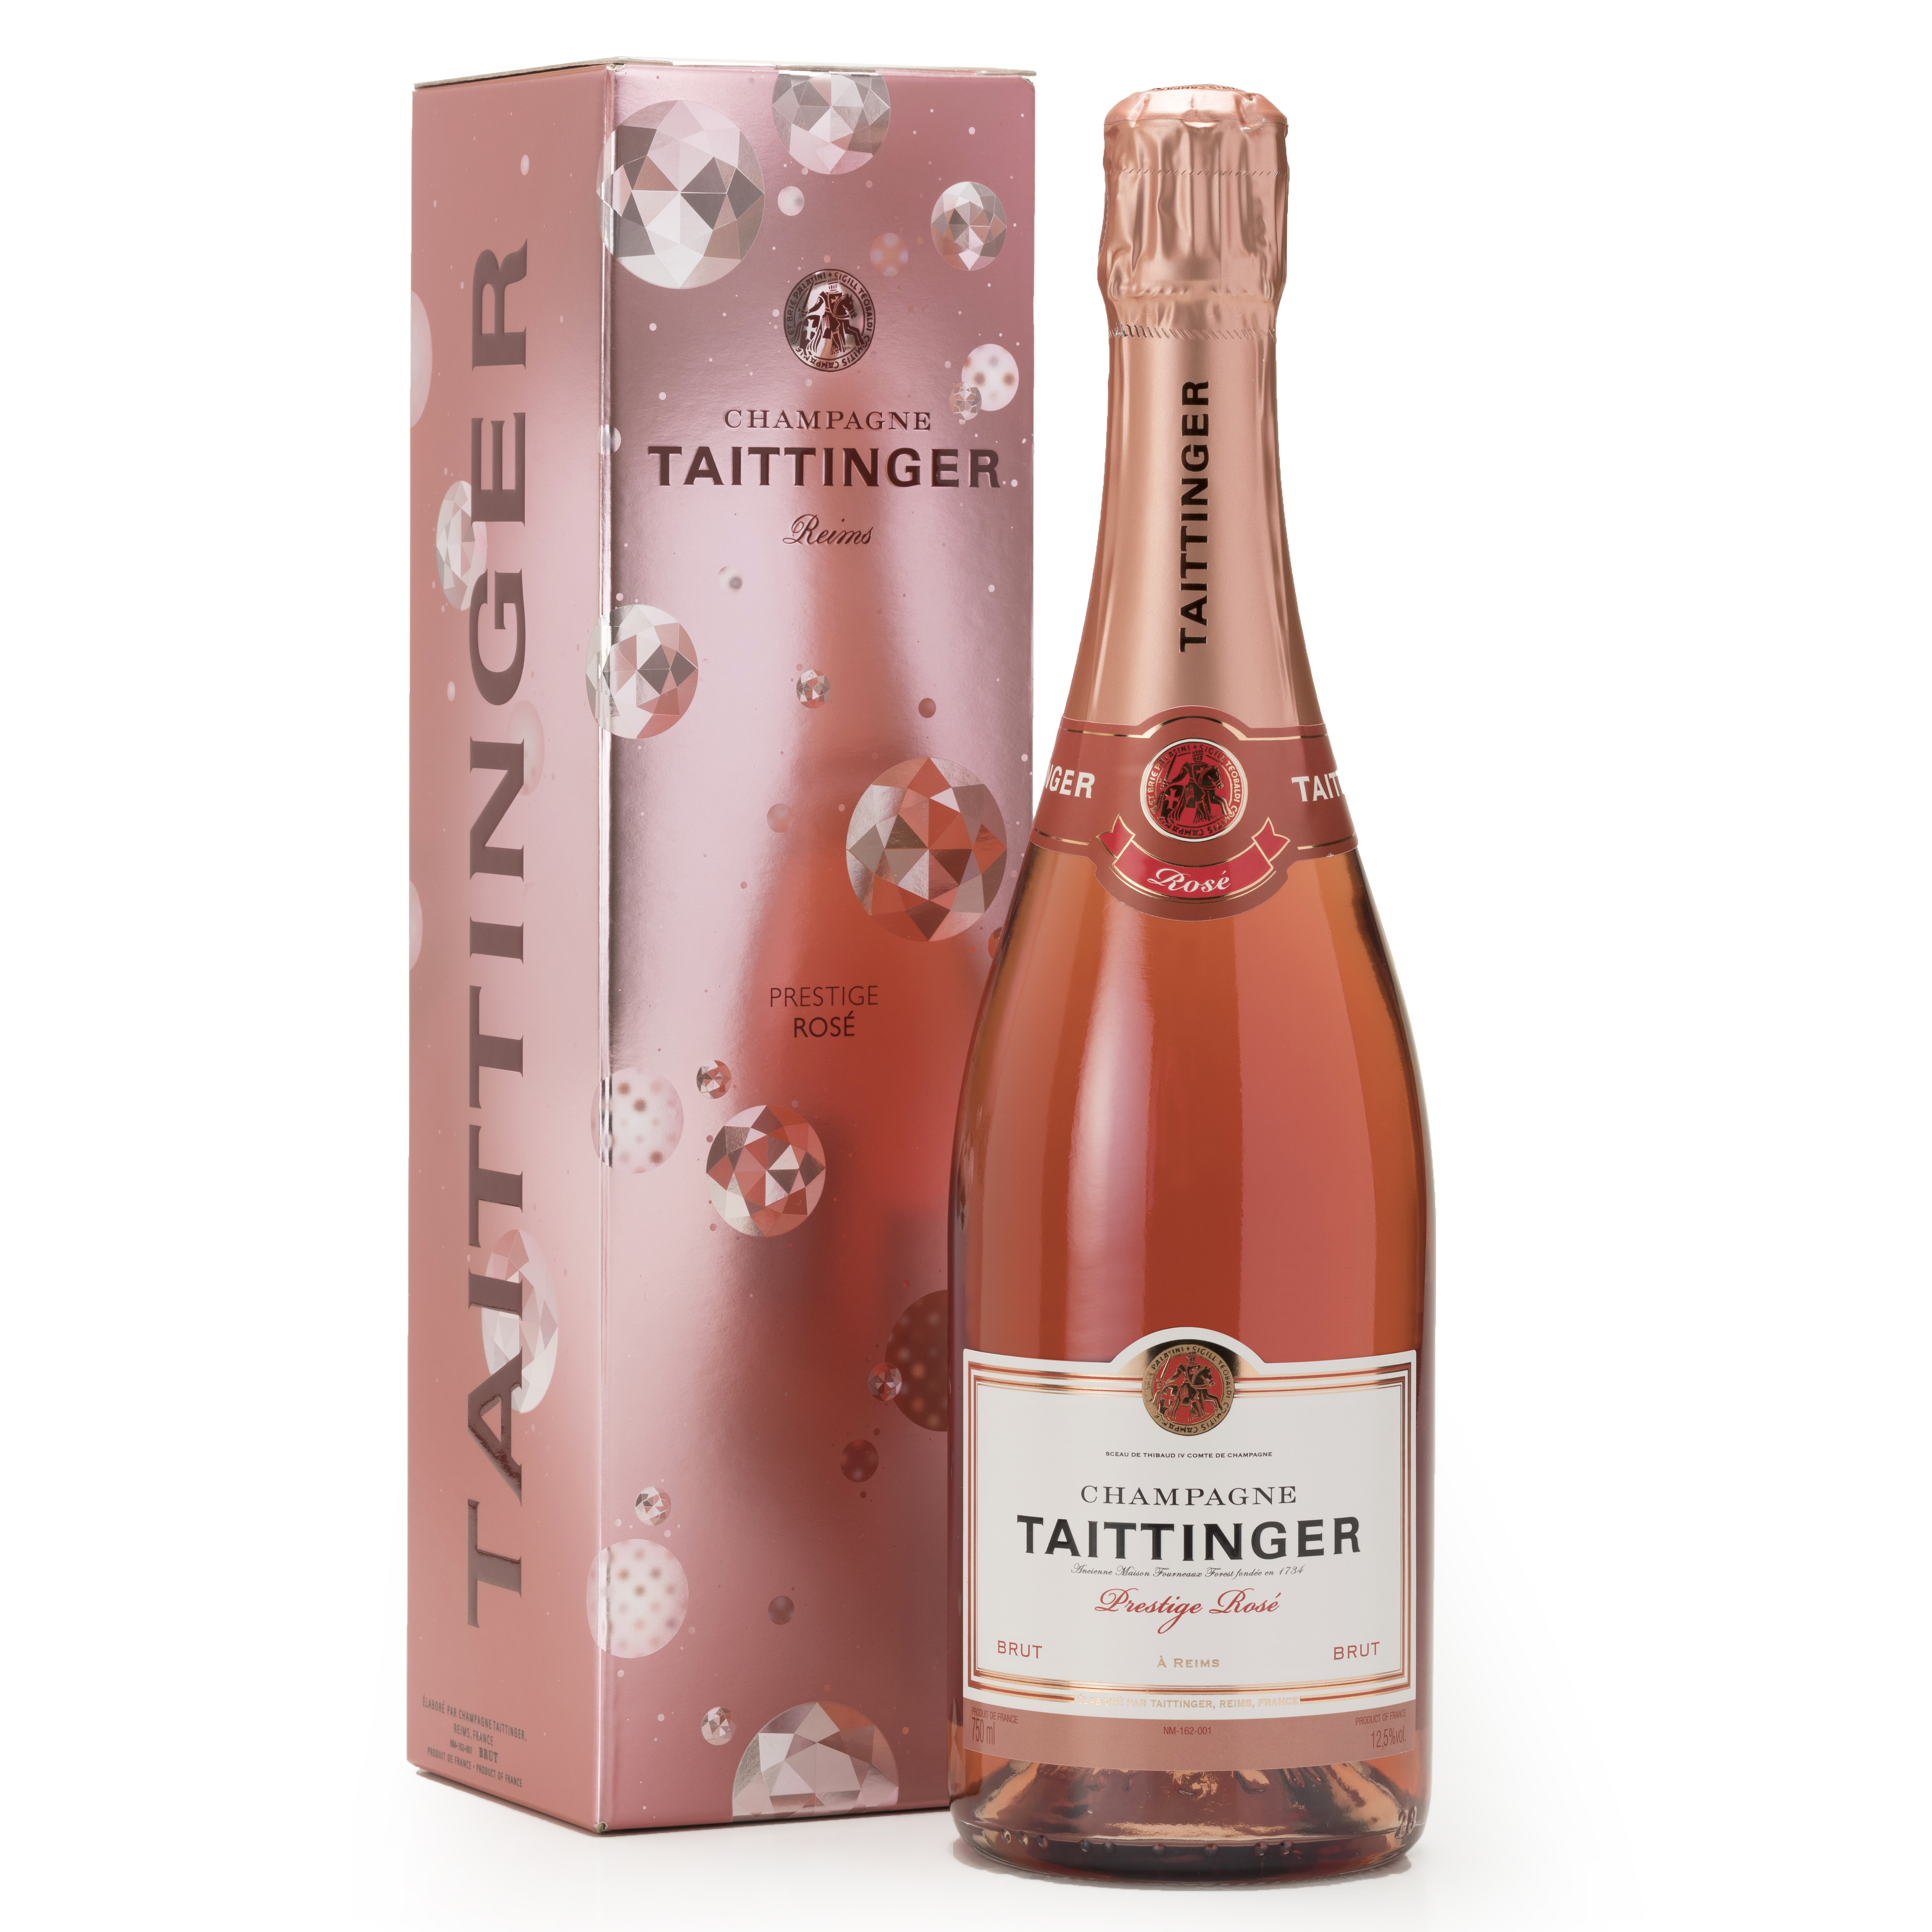 Taittinger Brut Prestige Rose NV Champagne 75cl Great Price and Home Delivery